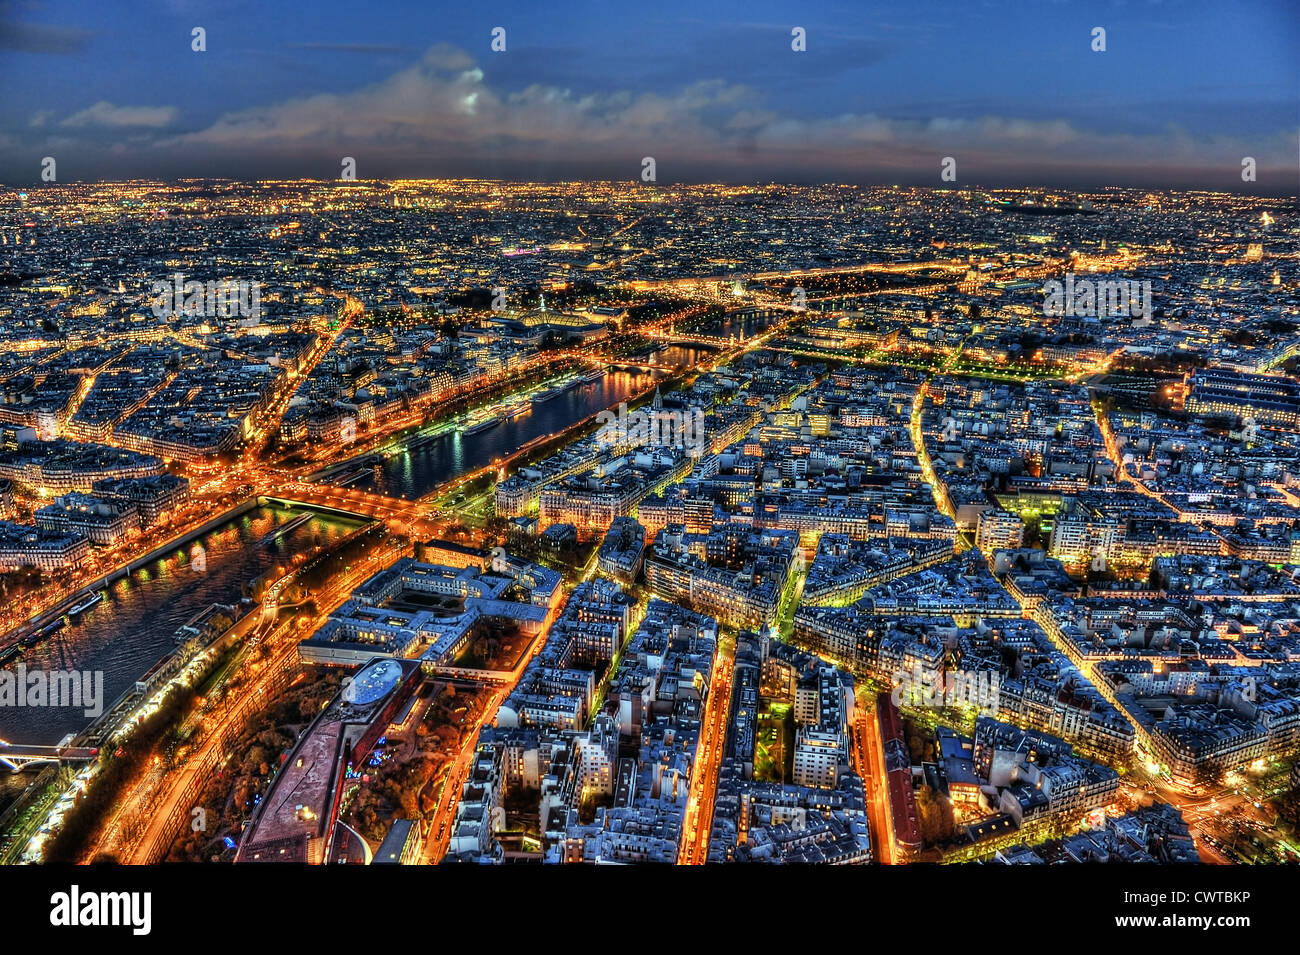 The view of Paris from the Eiffel Tower at night Stock Photo